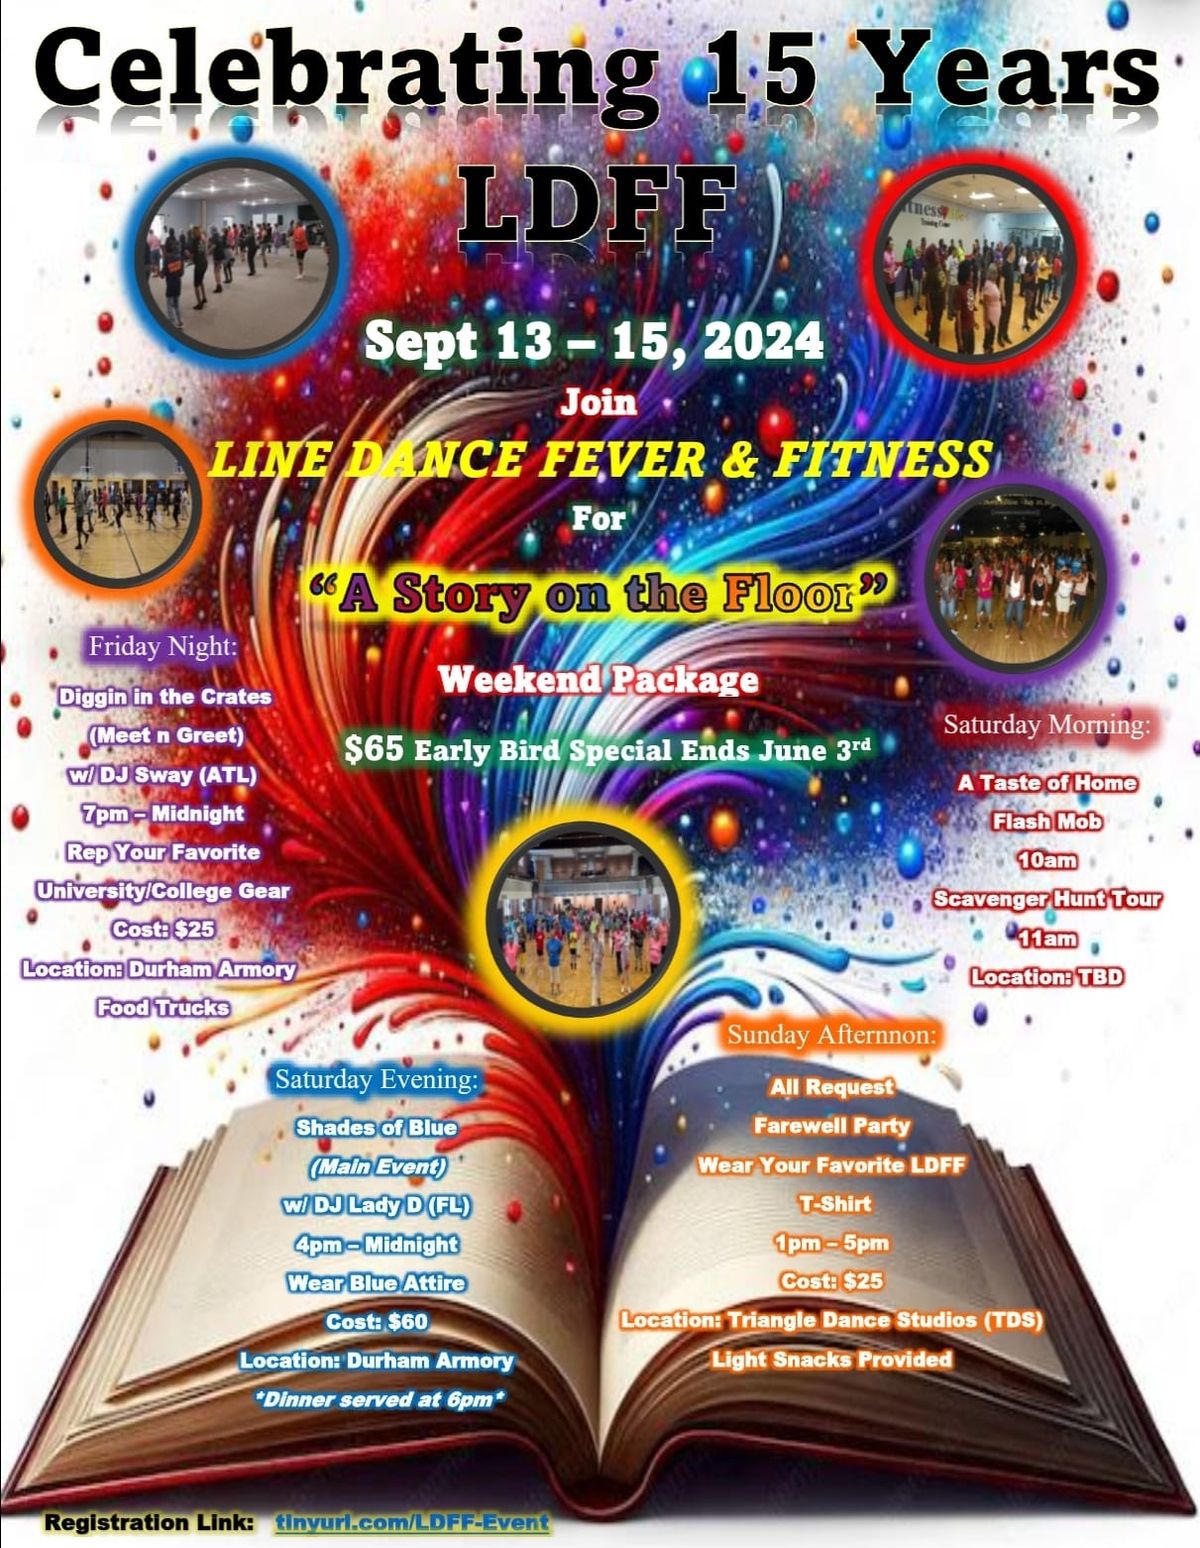 Line Dance Fever & Fitness Presents.... A Story On The Floor